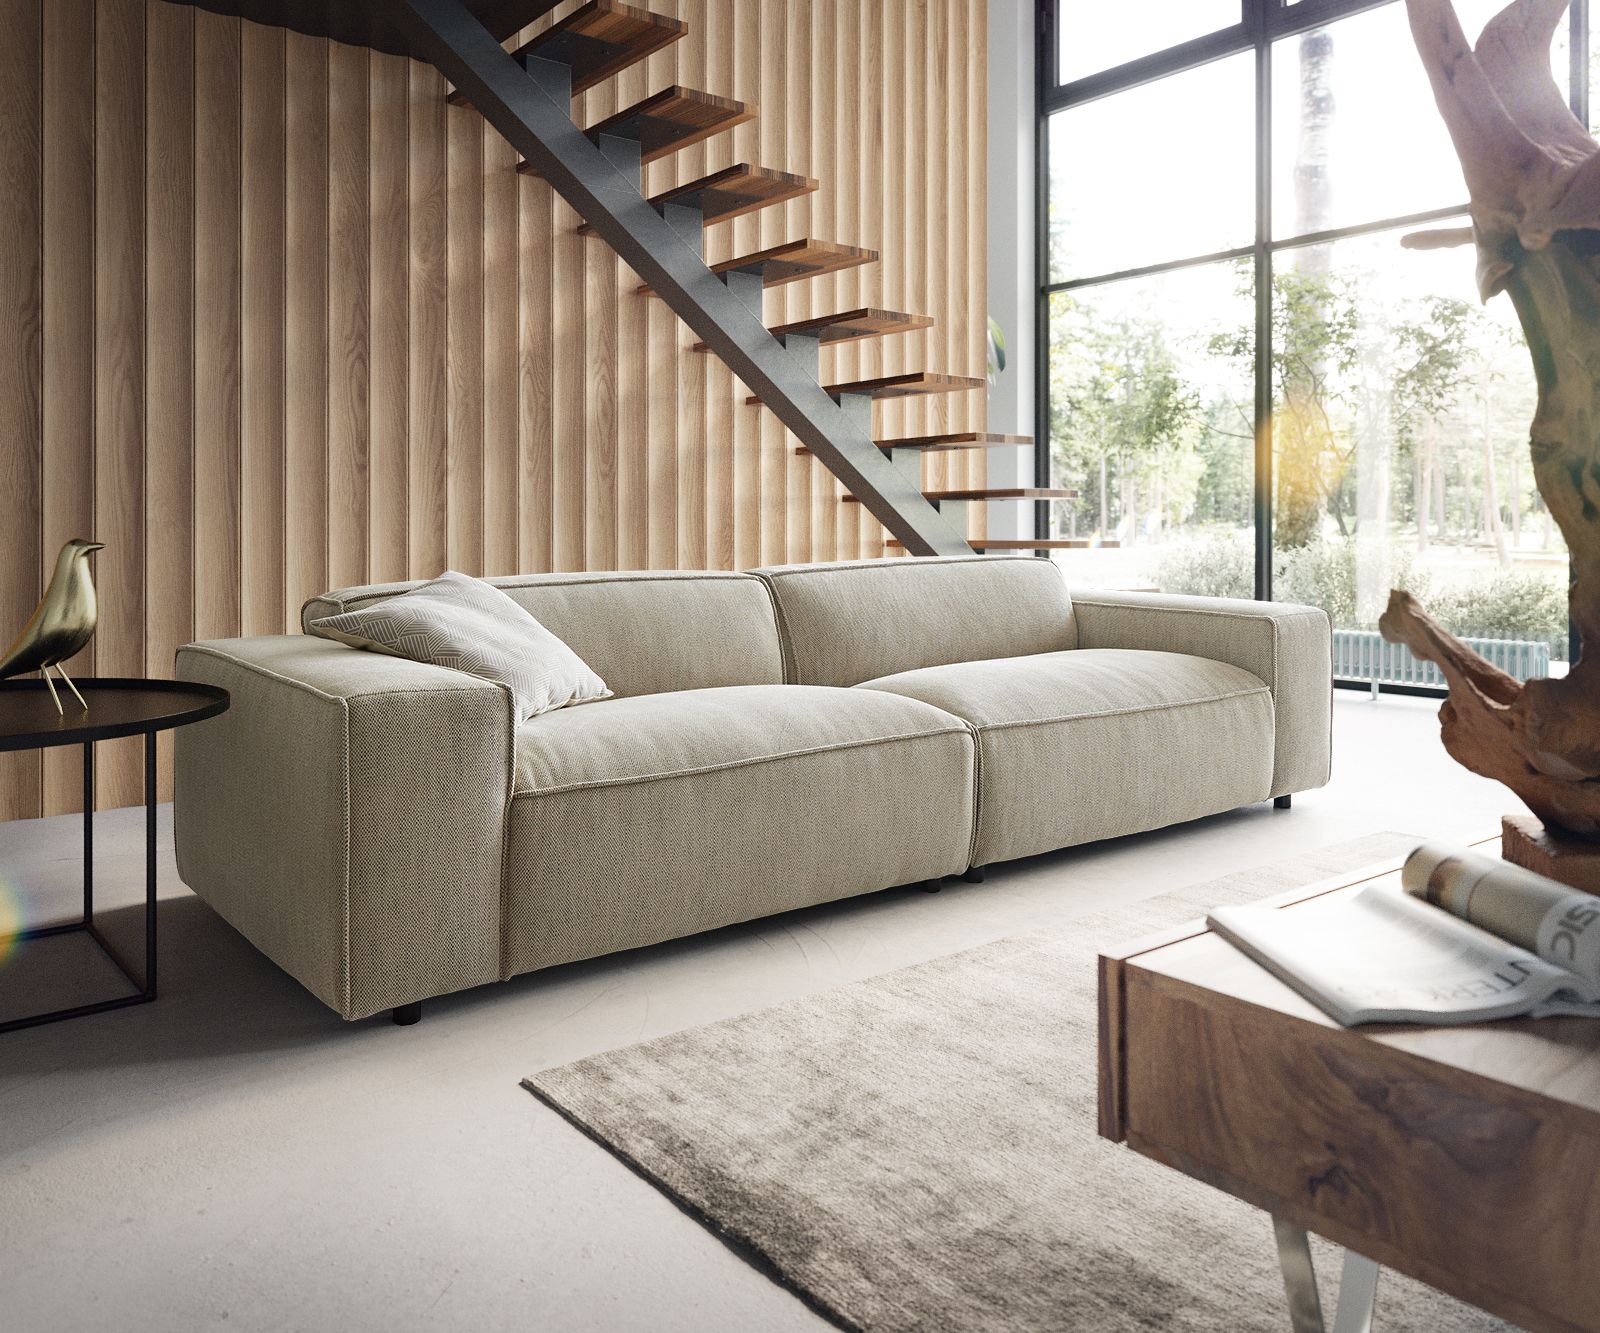 Big Sofa Tenso 285 X 105 Chenille Beige | Delife Pertaining To Sofas In Beige (View 2 of 15)